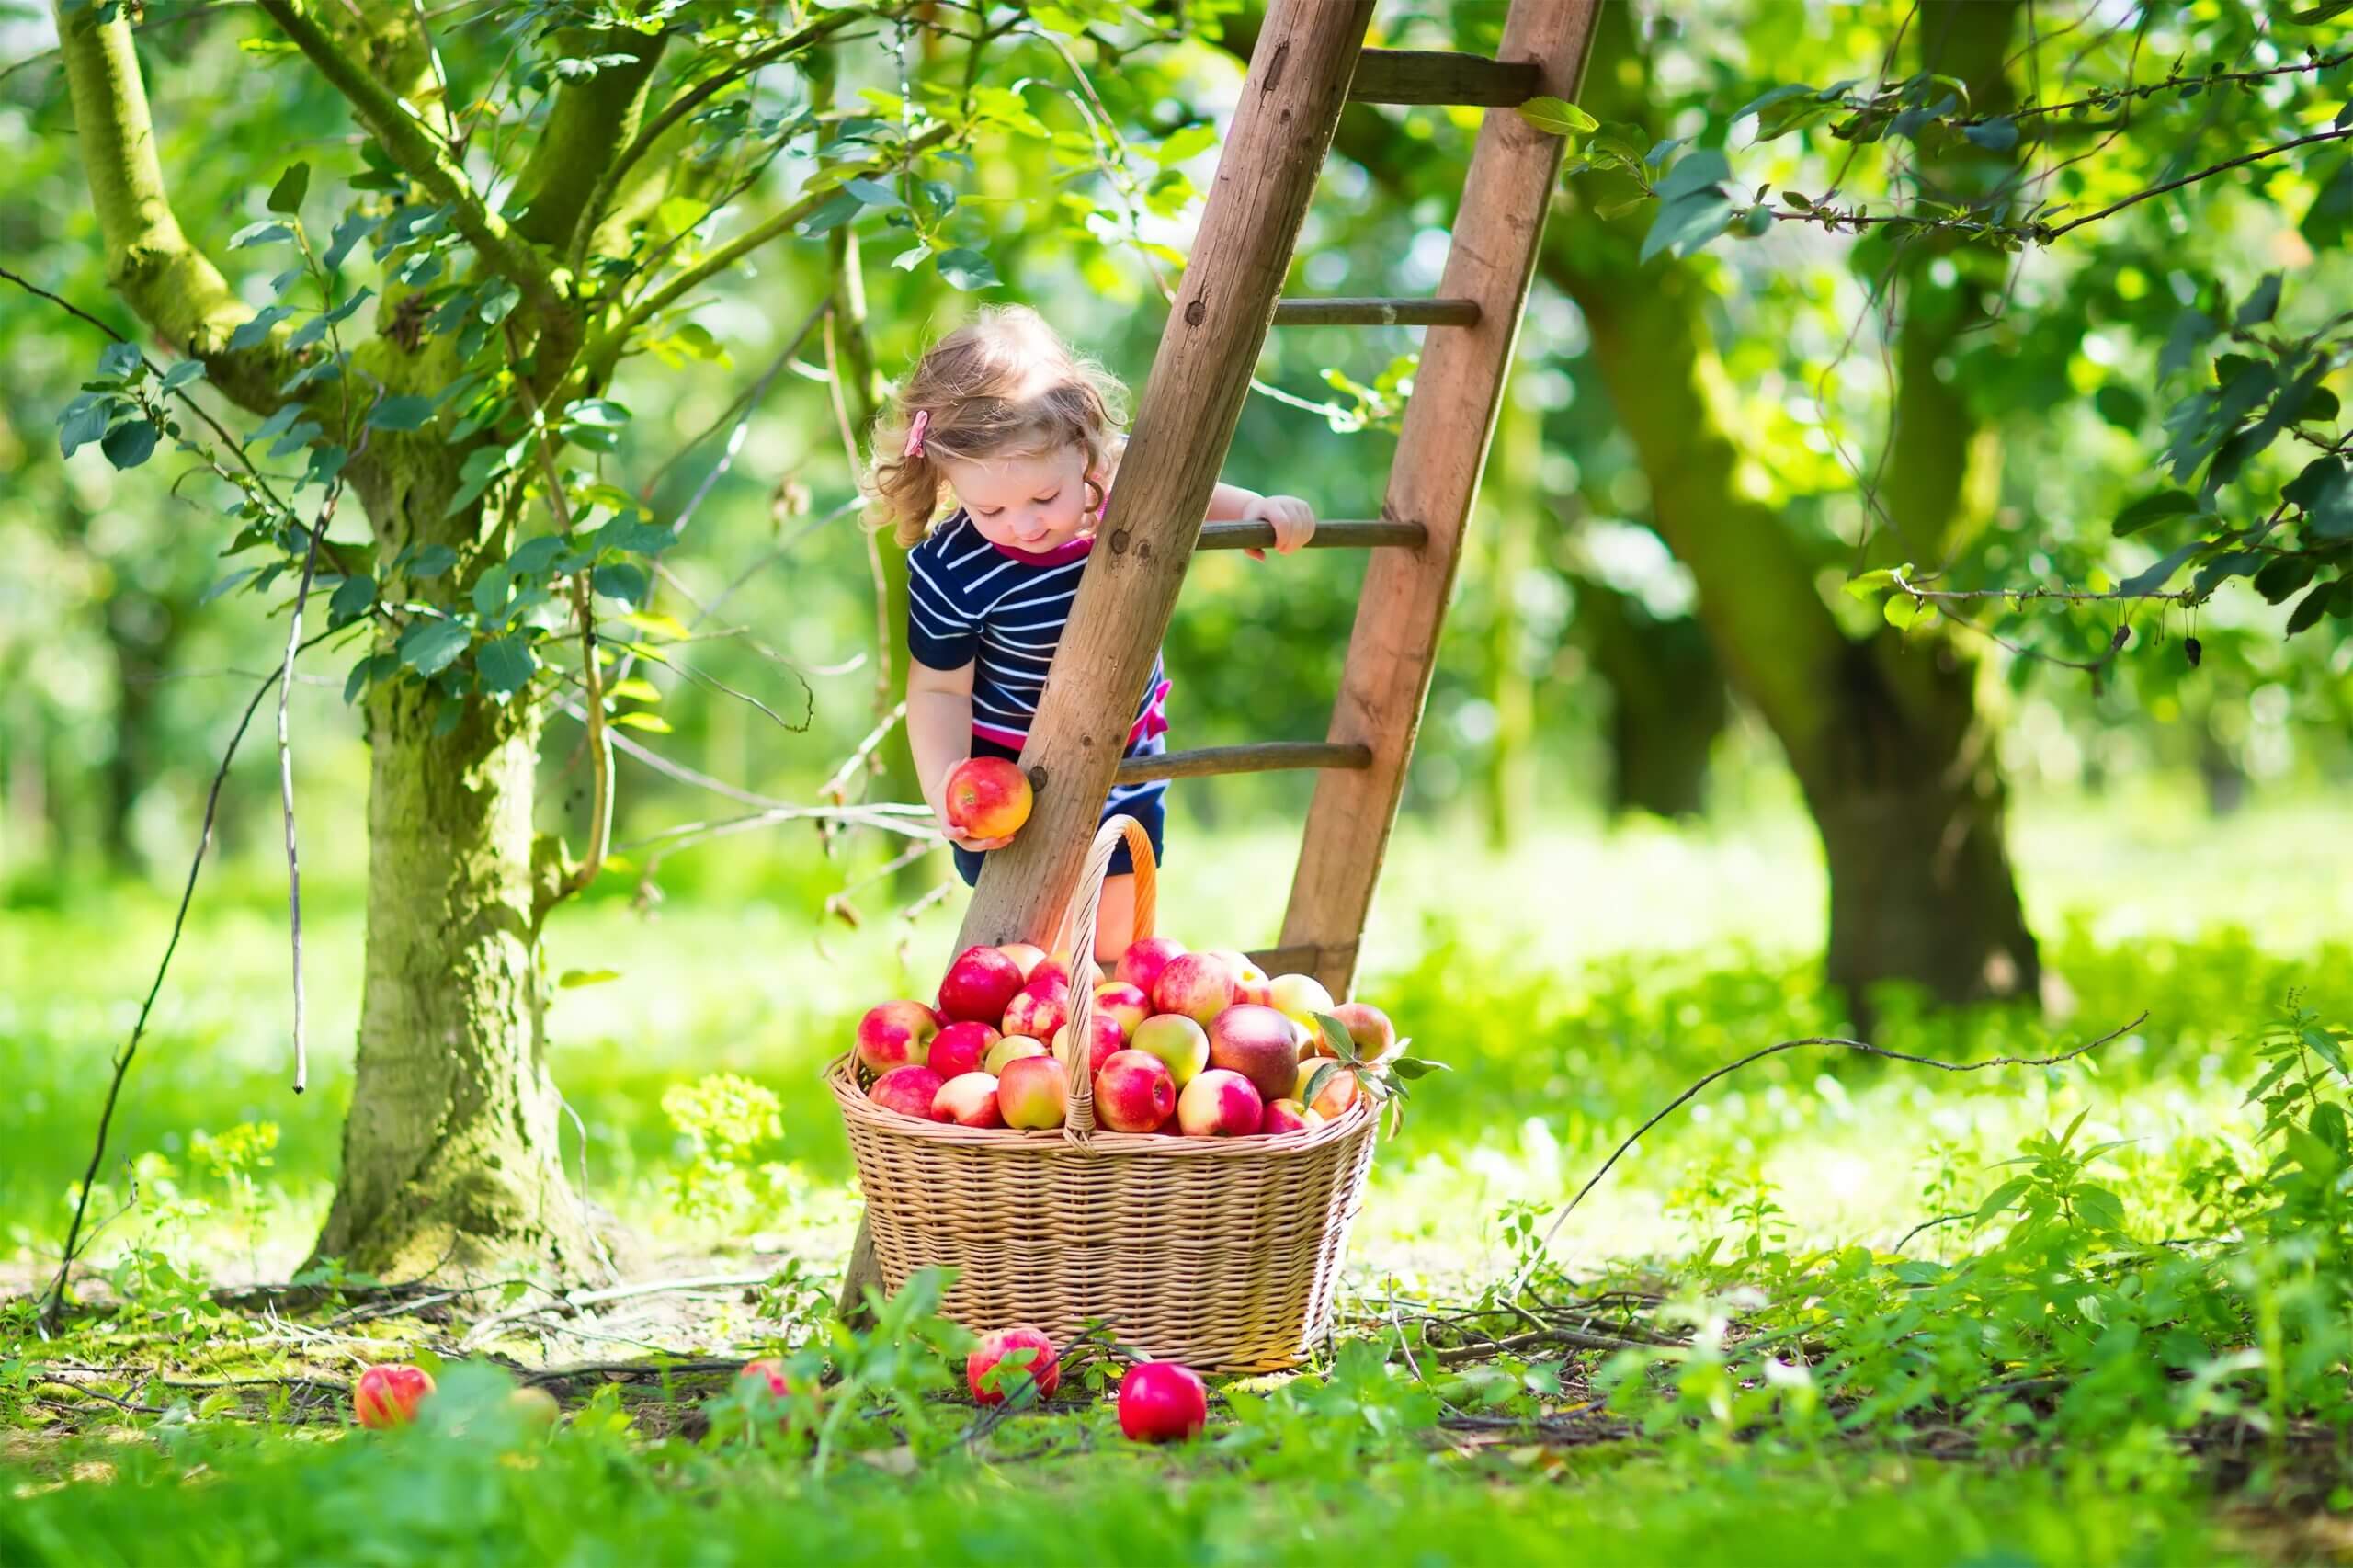 Adorable little toddler girl with curly hair wearing a blue dress climbing a ladder picking fresh apples in a beautiful fruit garden on a sunny autumn day